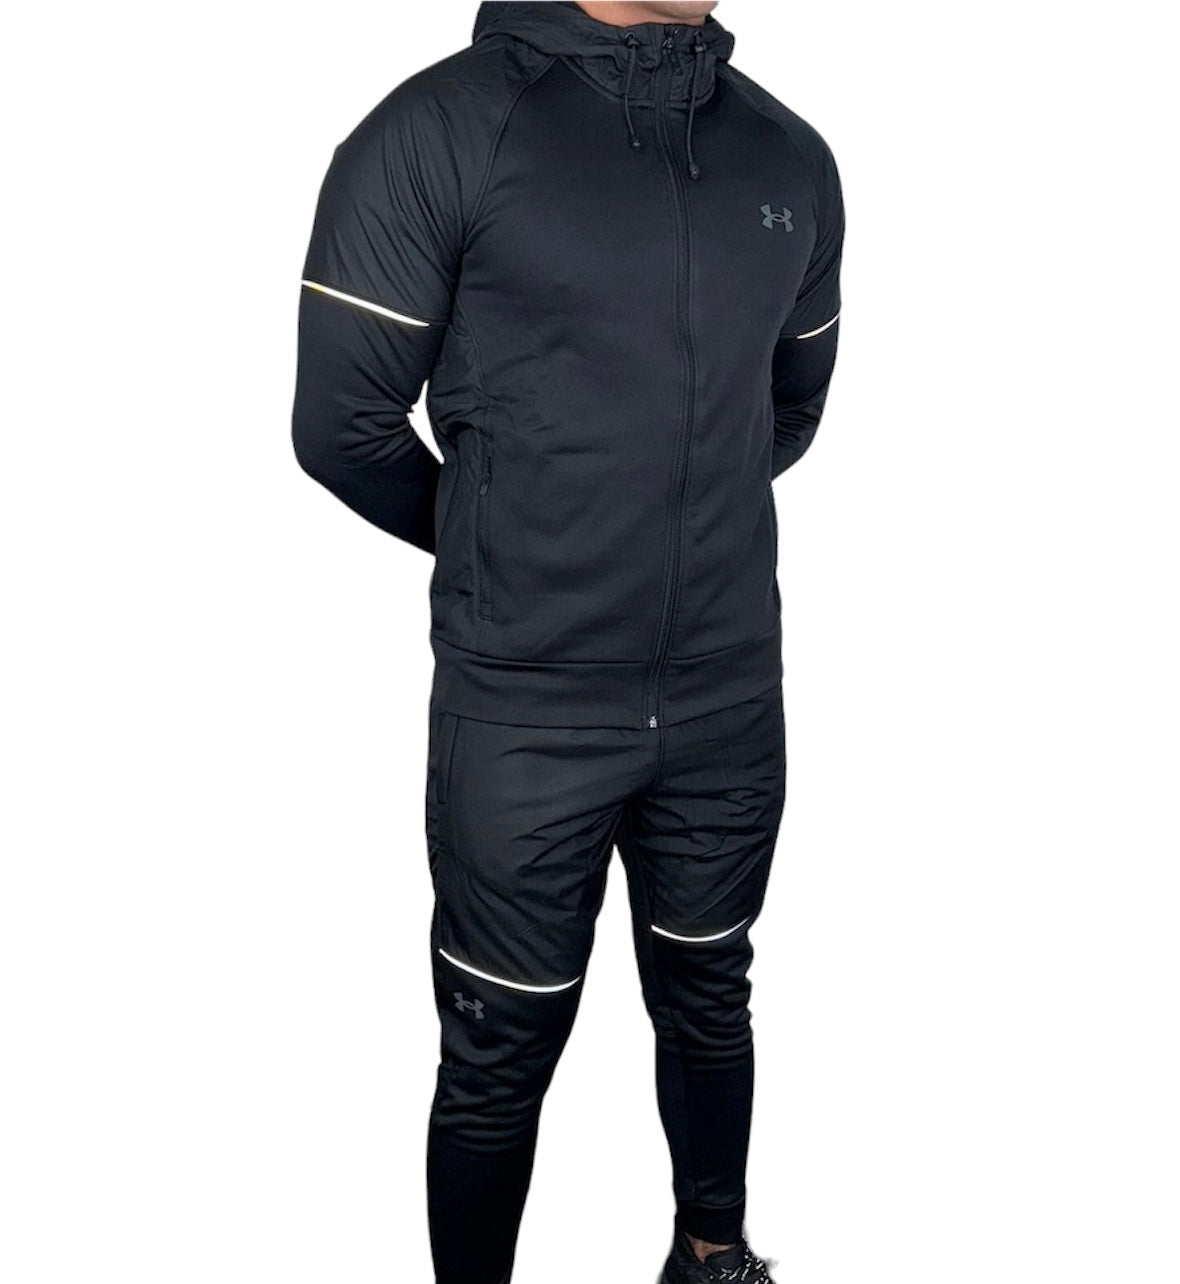 UNDER ARMOUR STORM RUN FULL TRACKSUIT - BLACK / GREY – SGN CLOTHING